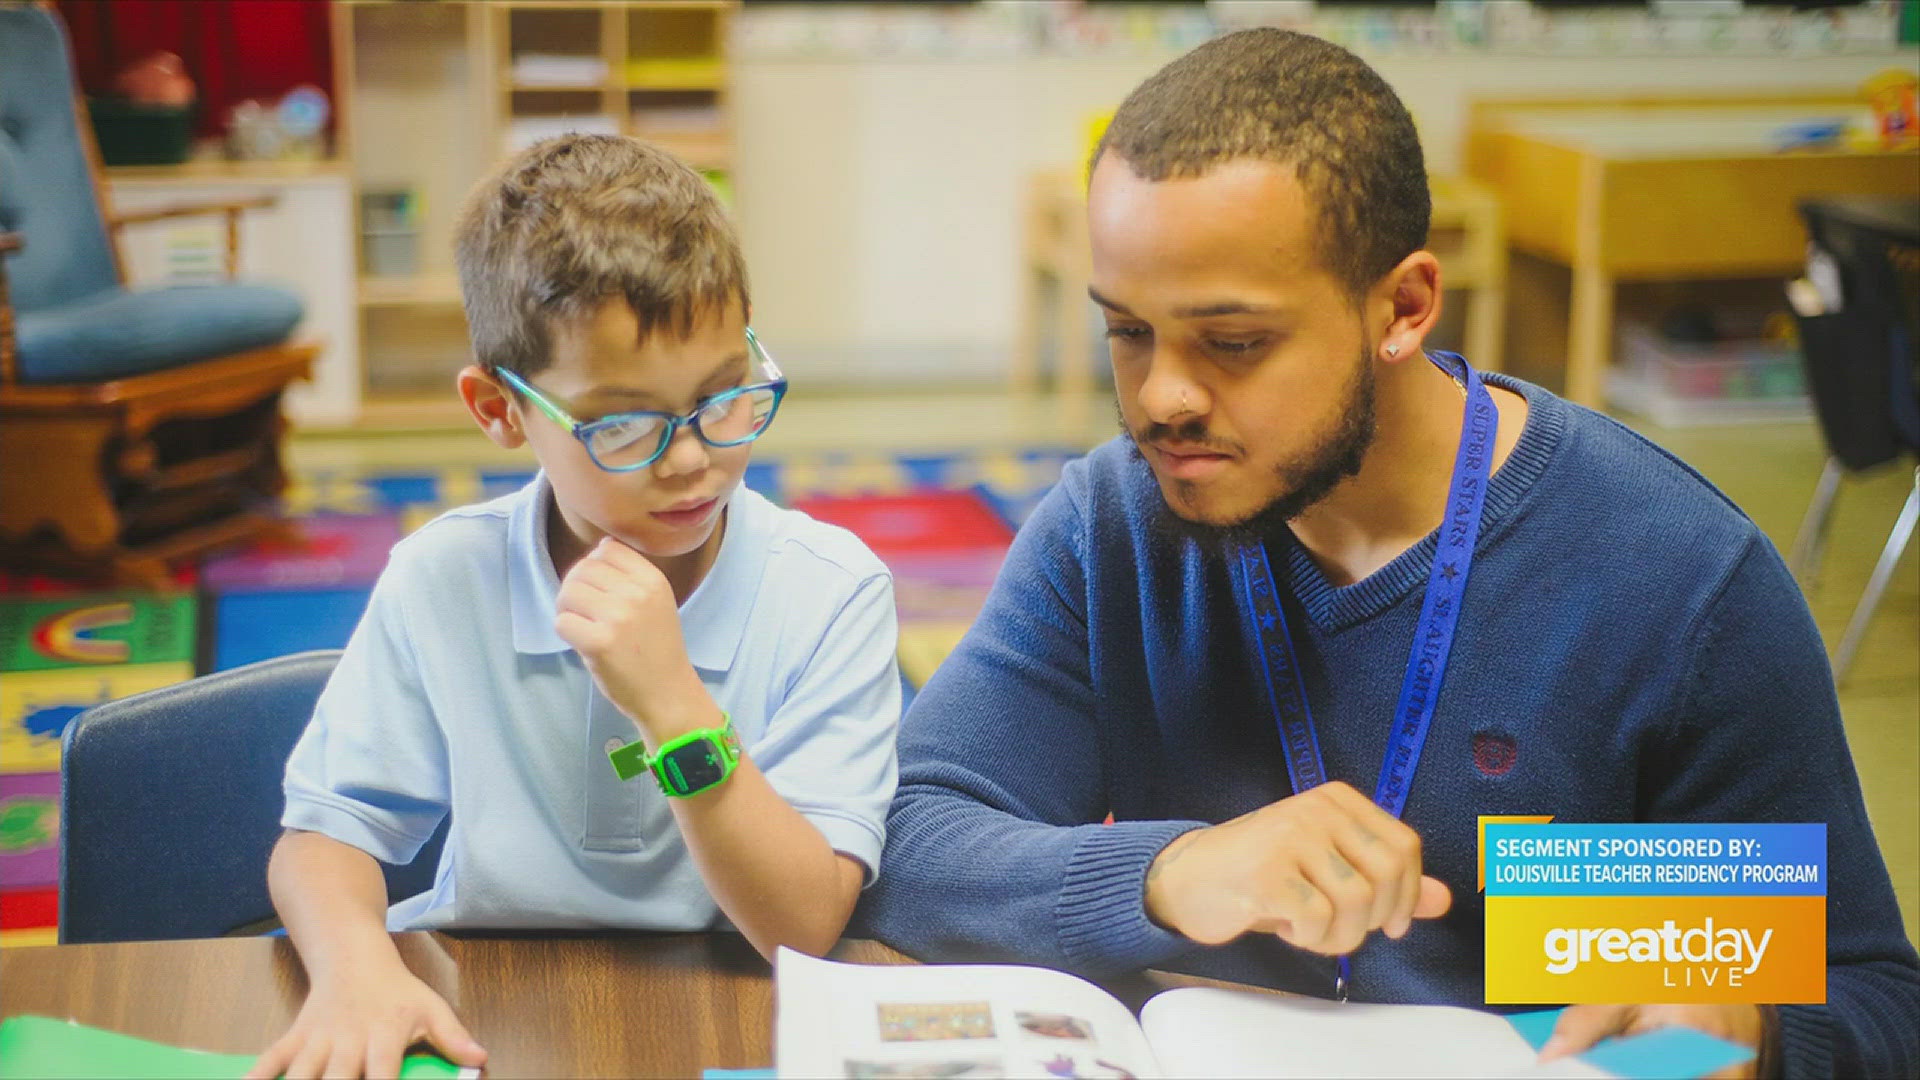 The Louisville Teacher Residency Program works to train teachers become equipped with the tools to teach the next generation of young scholars.